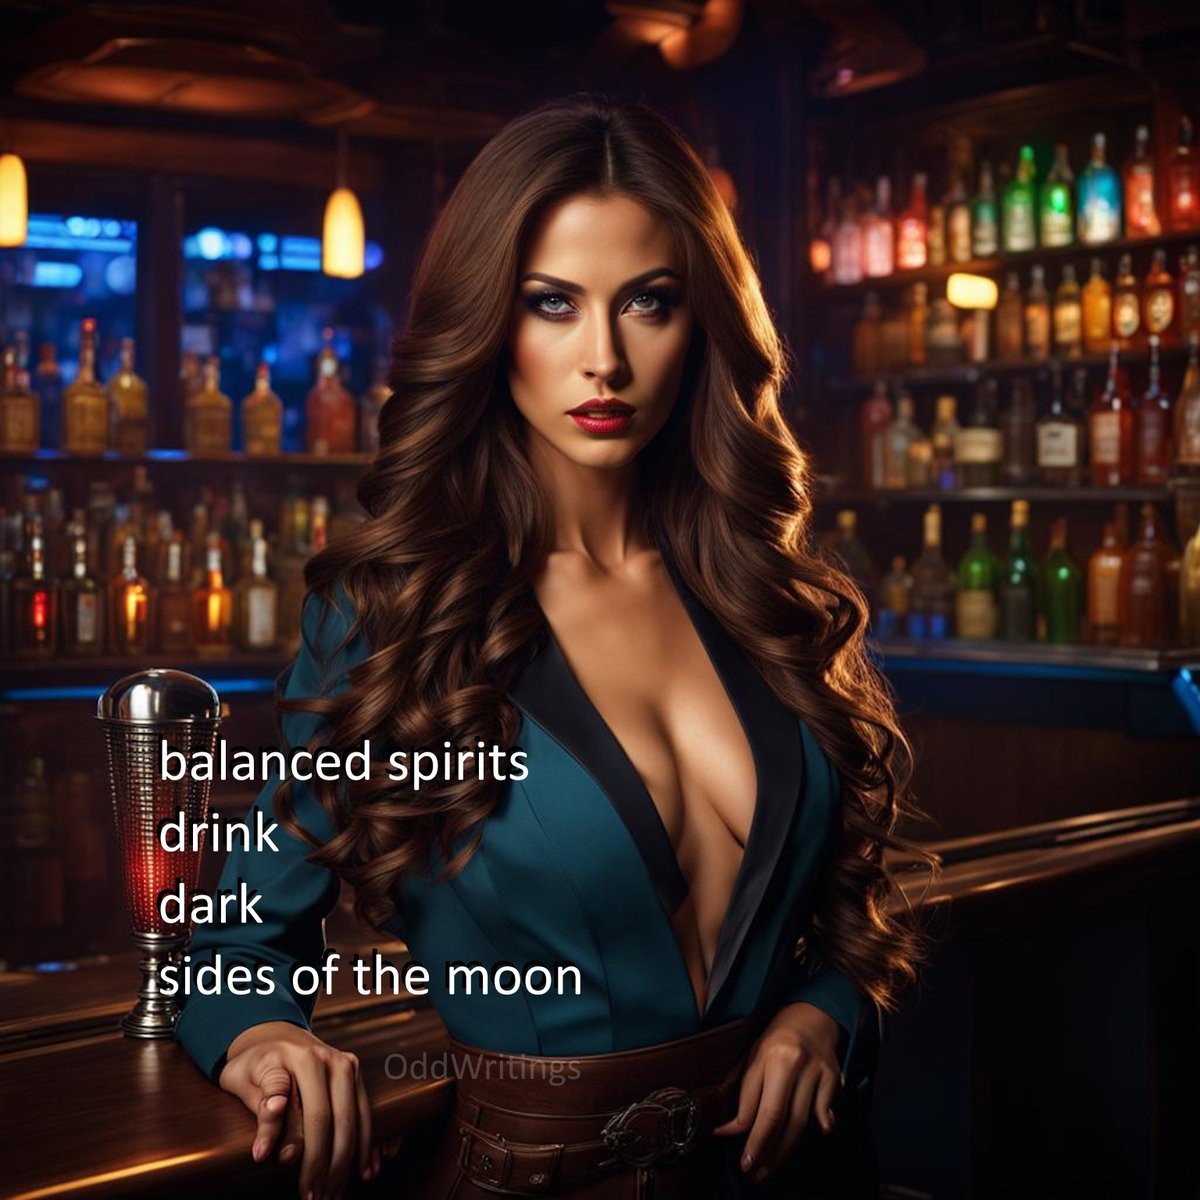 balanced spirits
drink
dark
sides of the moon

#Only8Words #Amatory